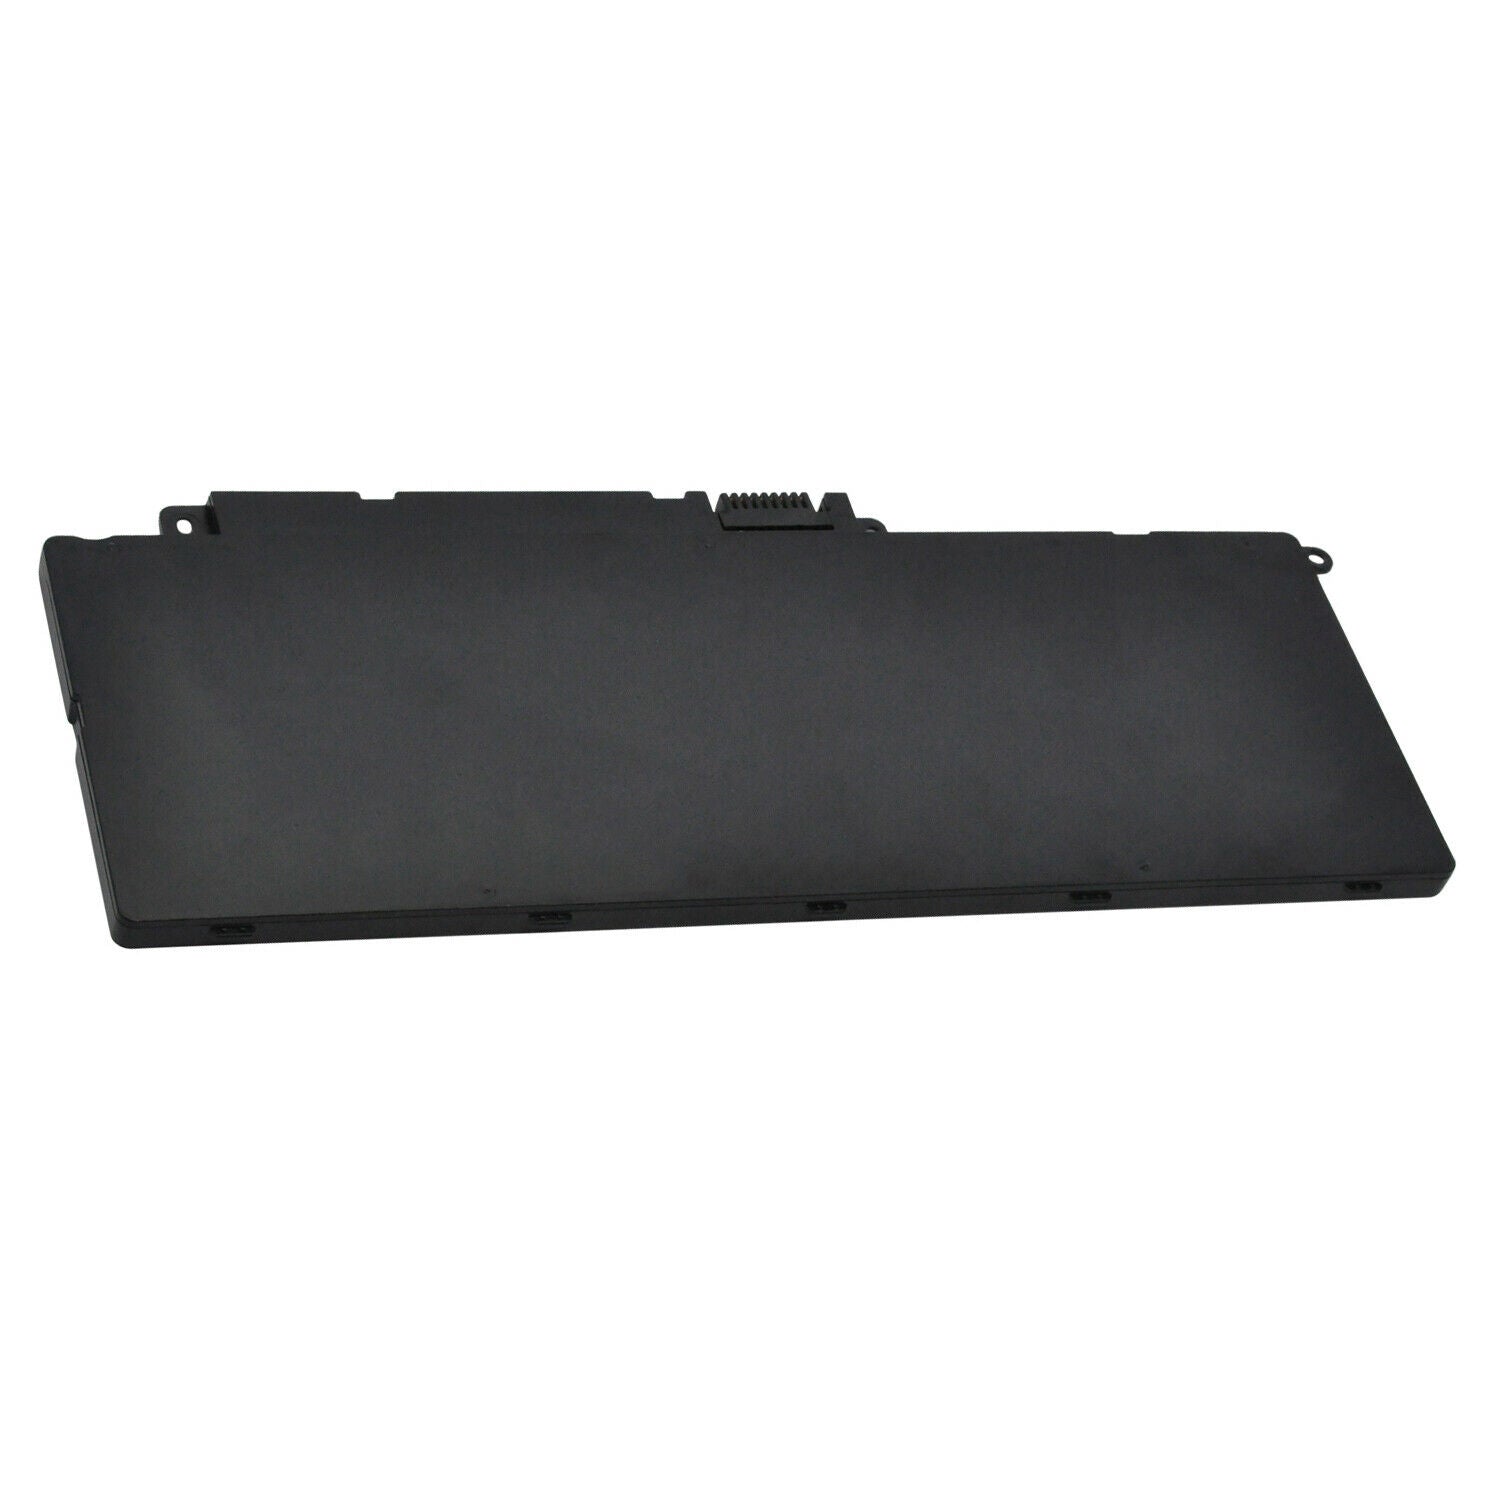 58Wh Original Battery For Inspiron 15 7537